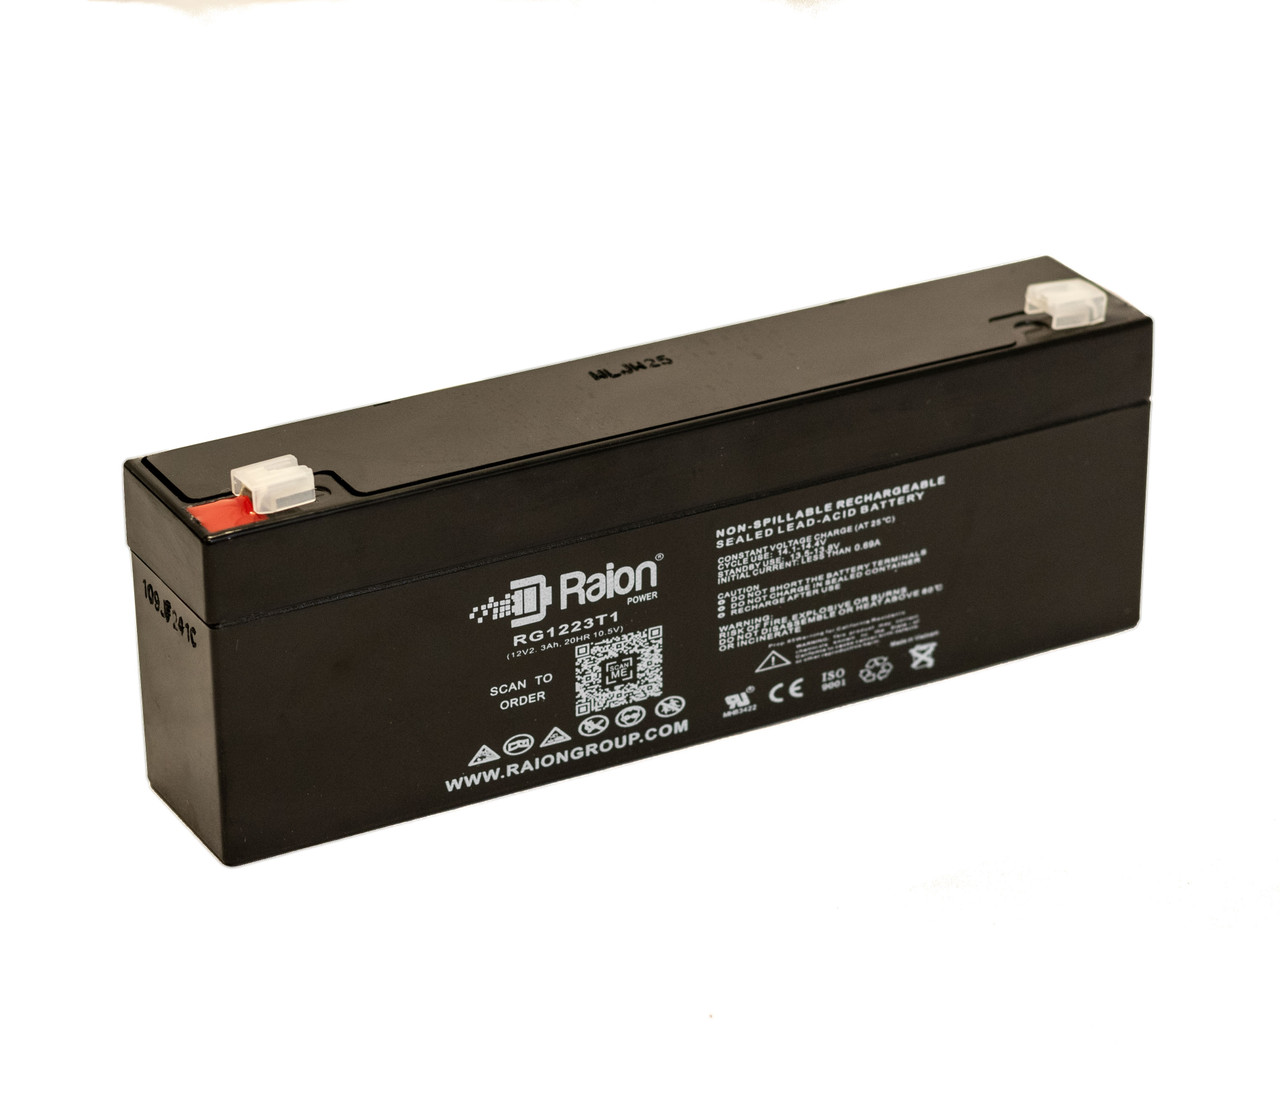 Raion Power RG1223T1 Replacement Battery for Drypower 12SB2.3P